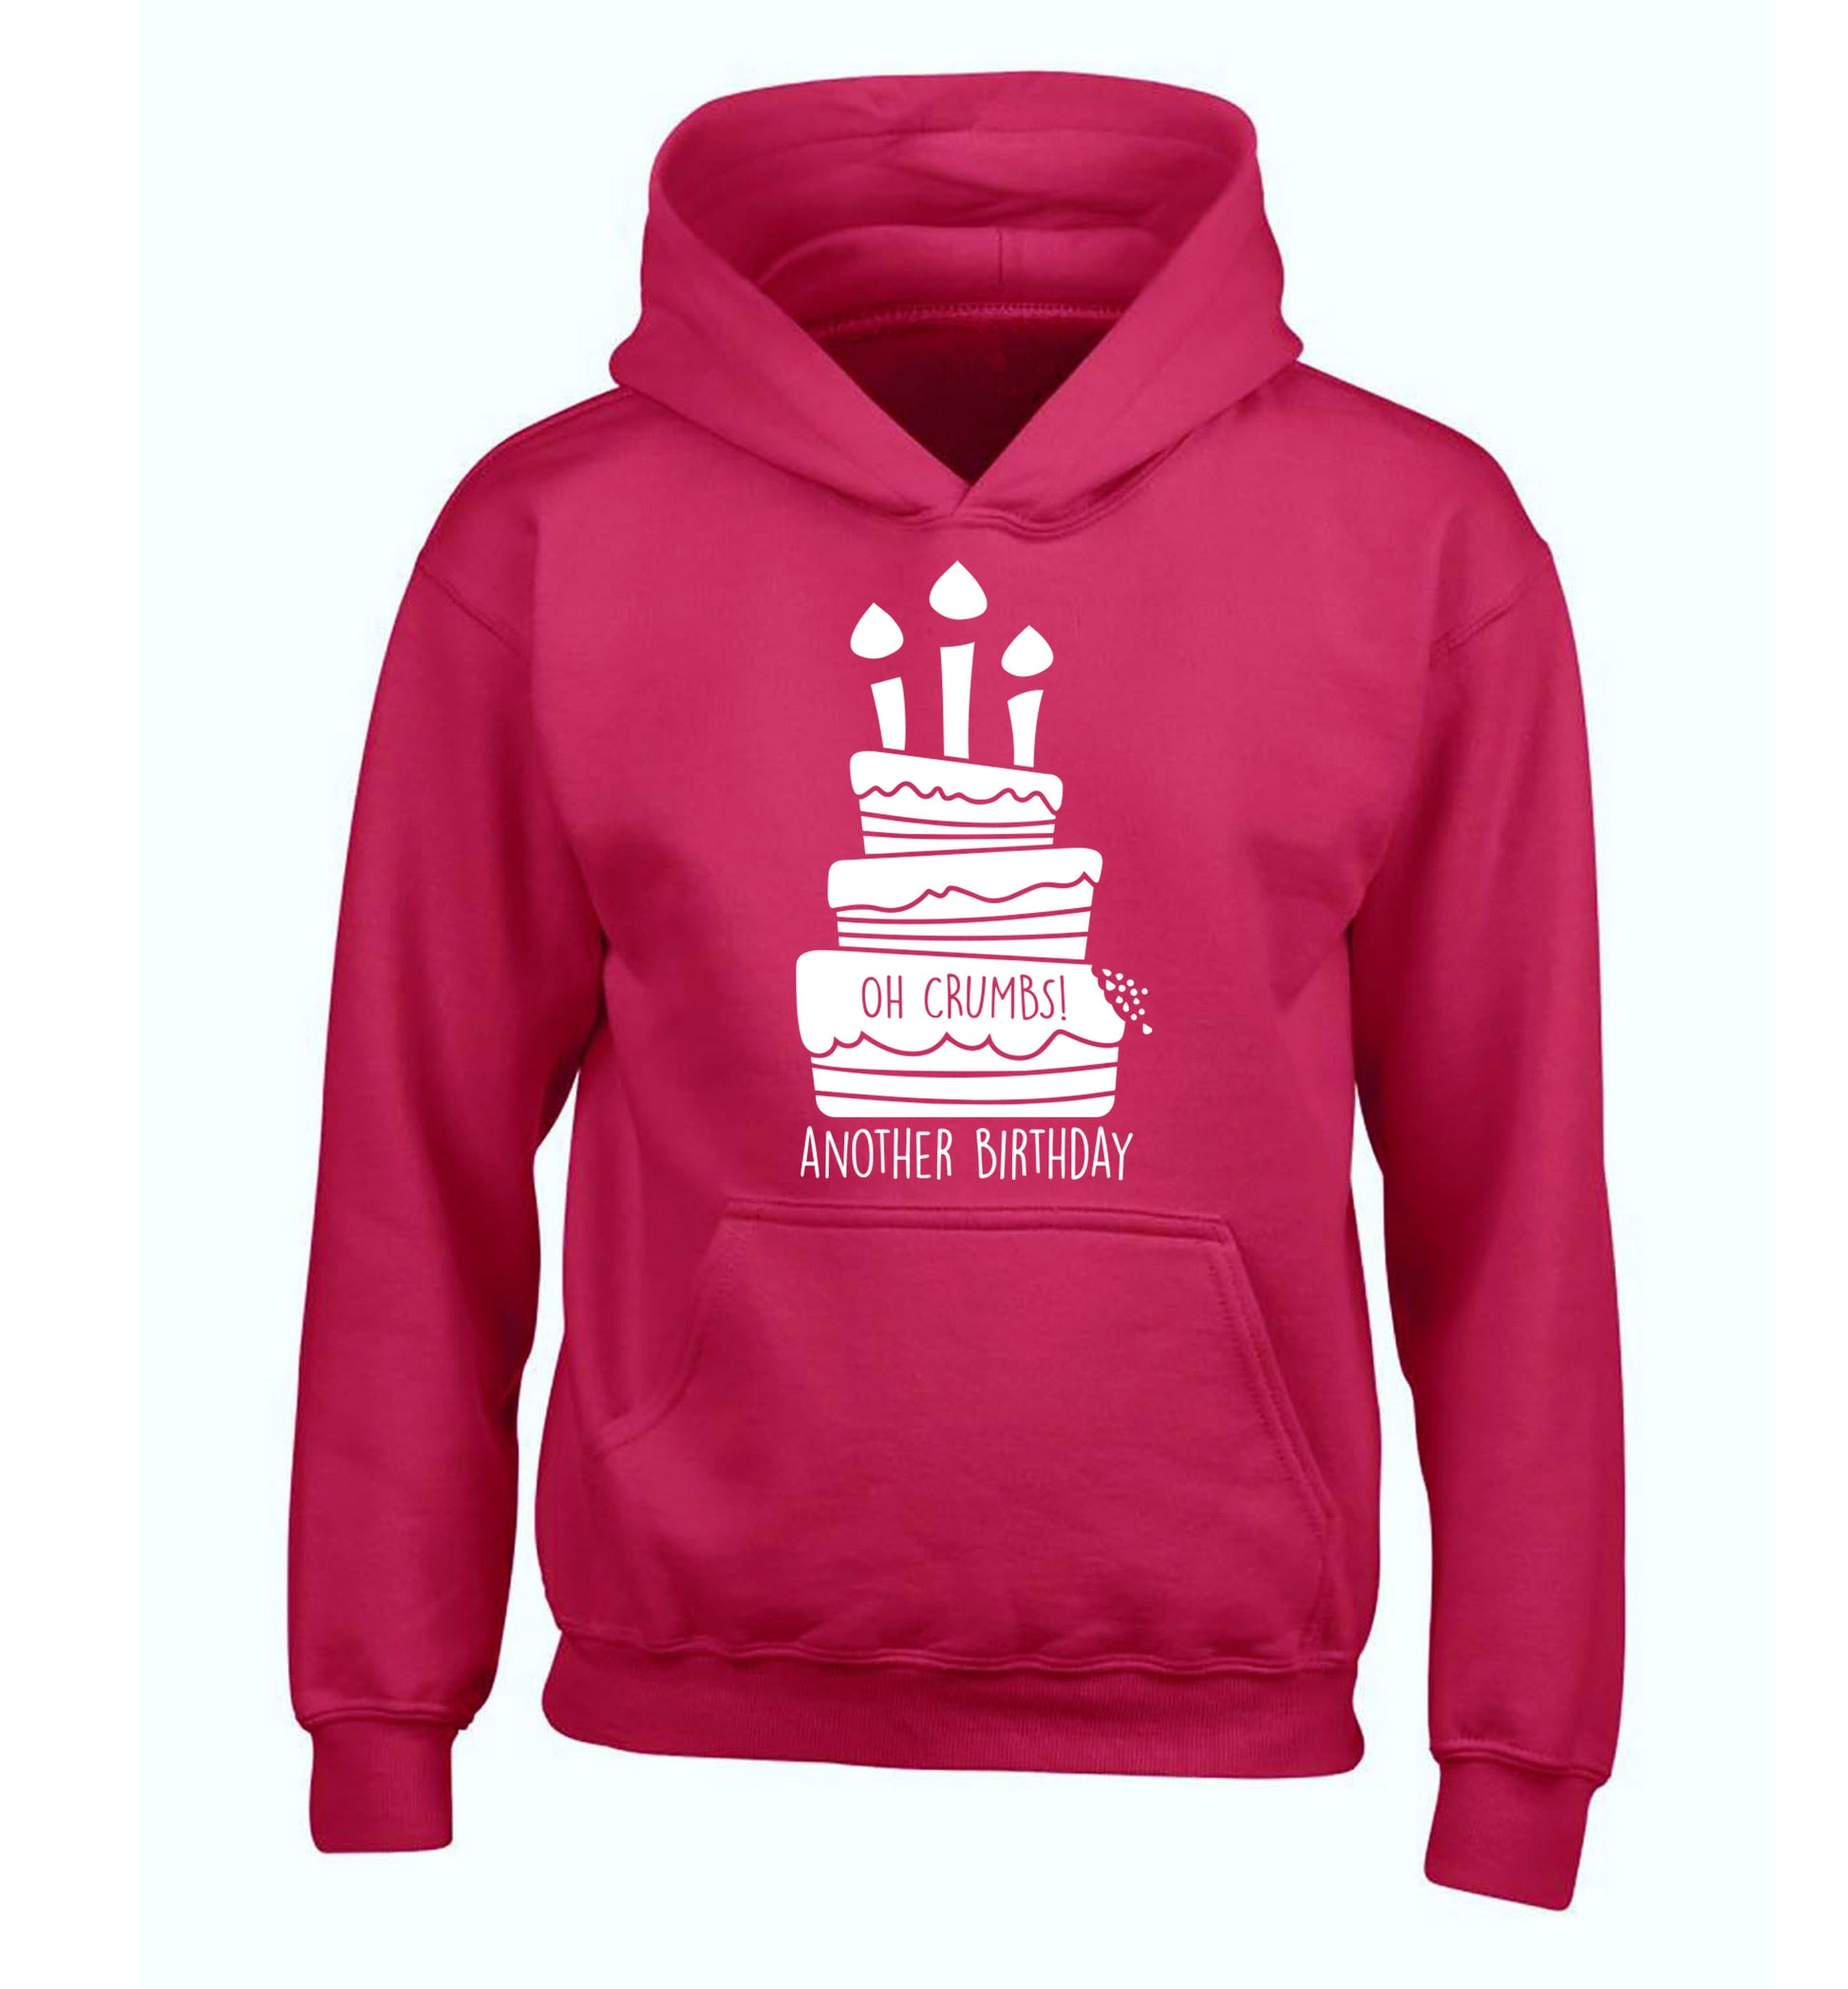 Oh crumbs another birthday! children's pink hoodie 12-14 Years